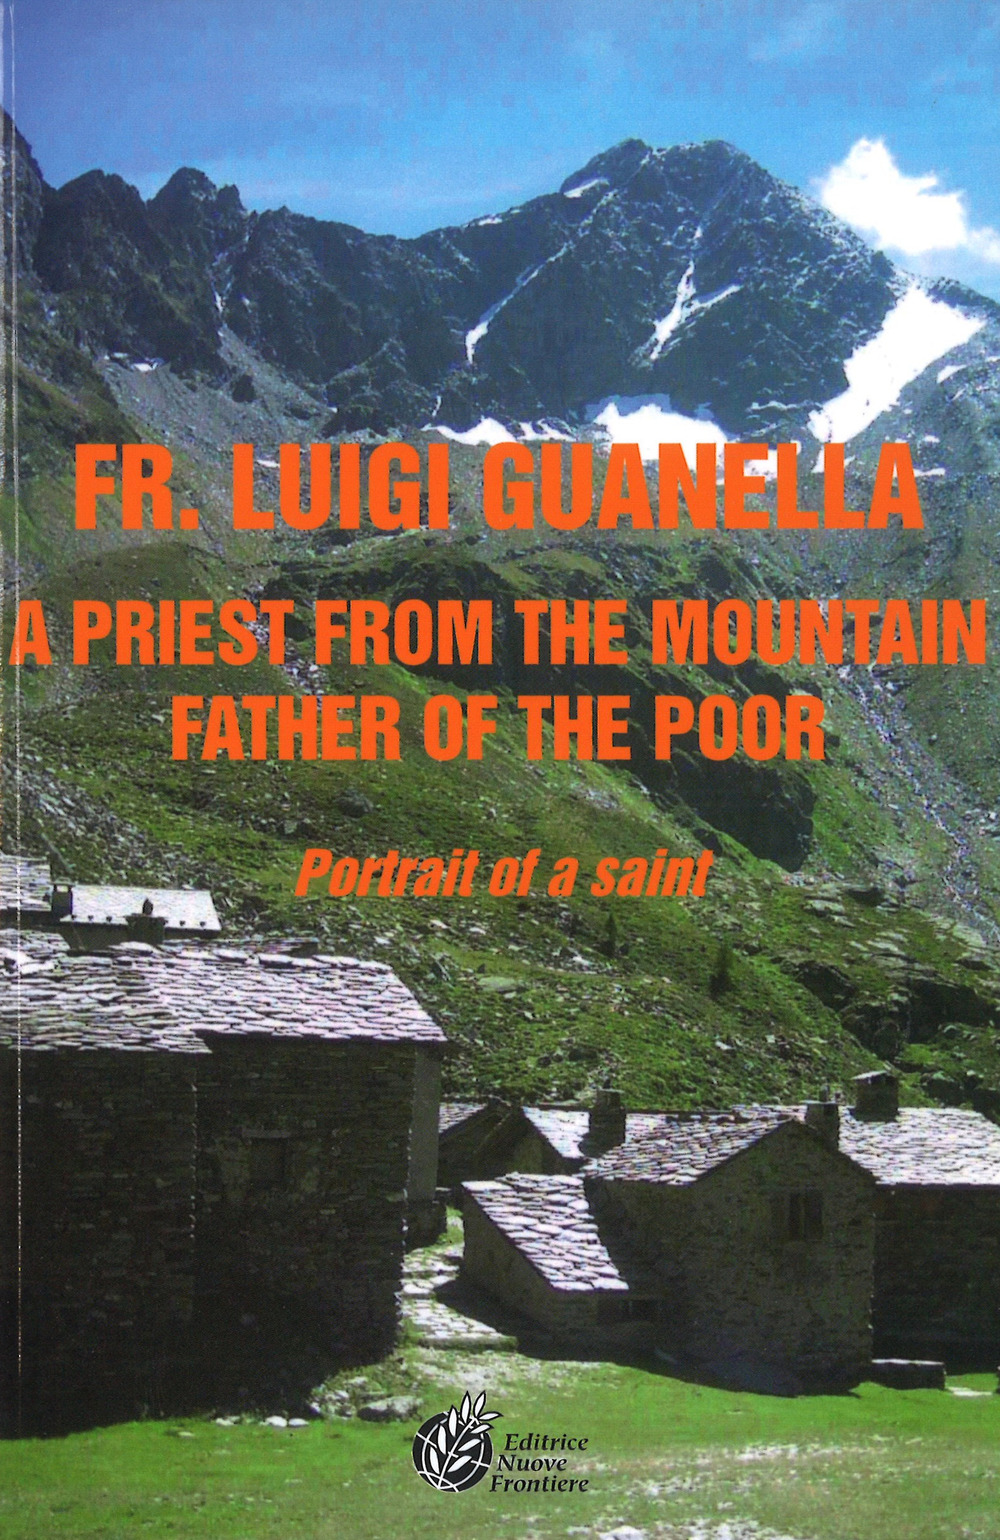 Fr. Luigi Guanella a priest from the mountain father of the poor. Portrai of a saint